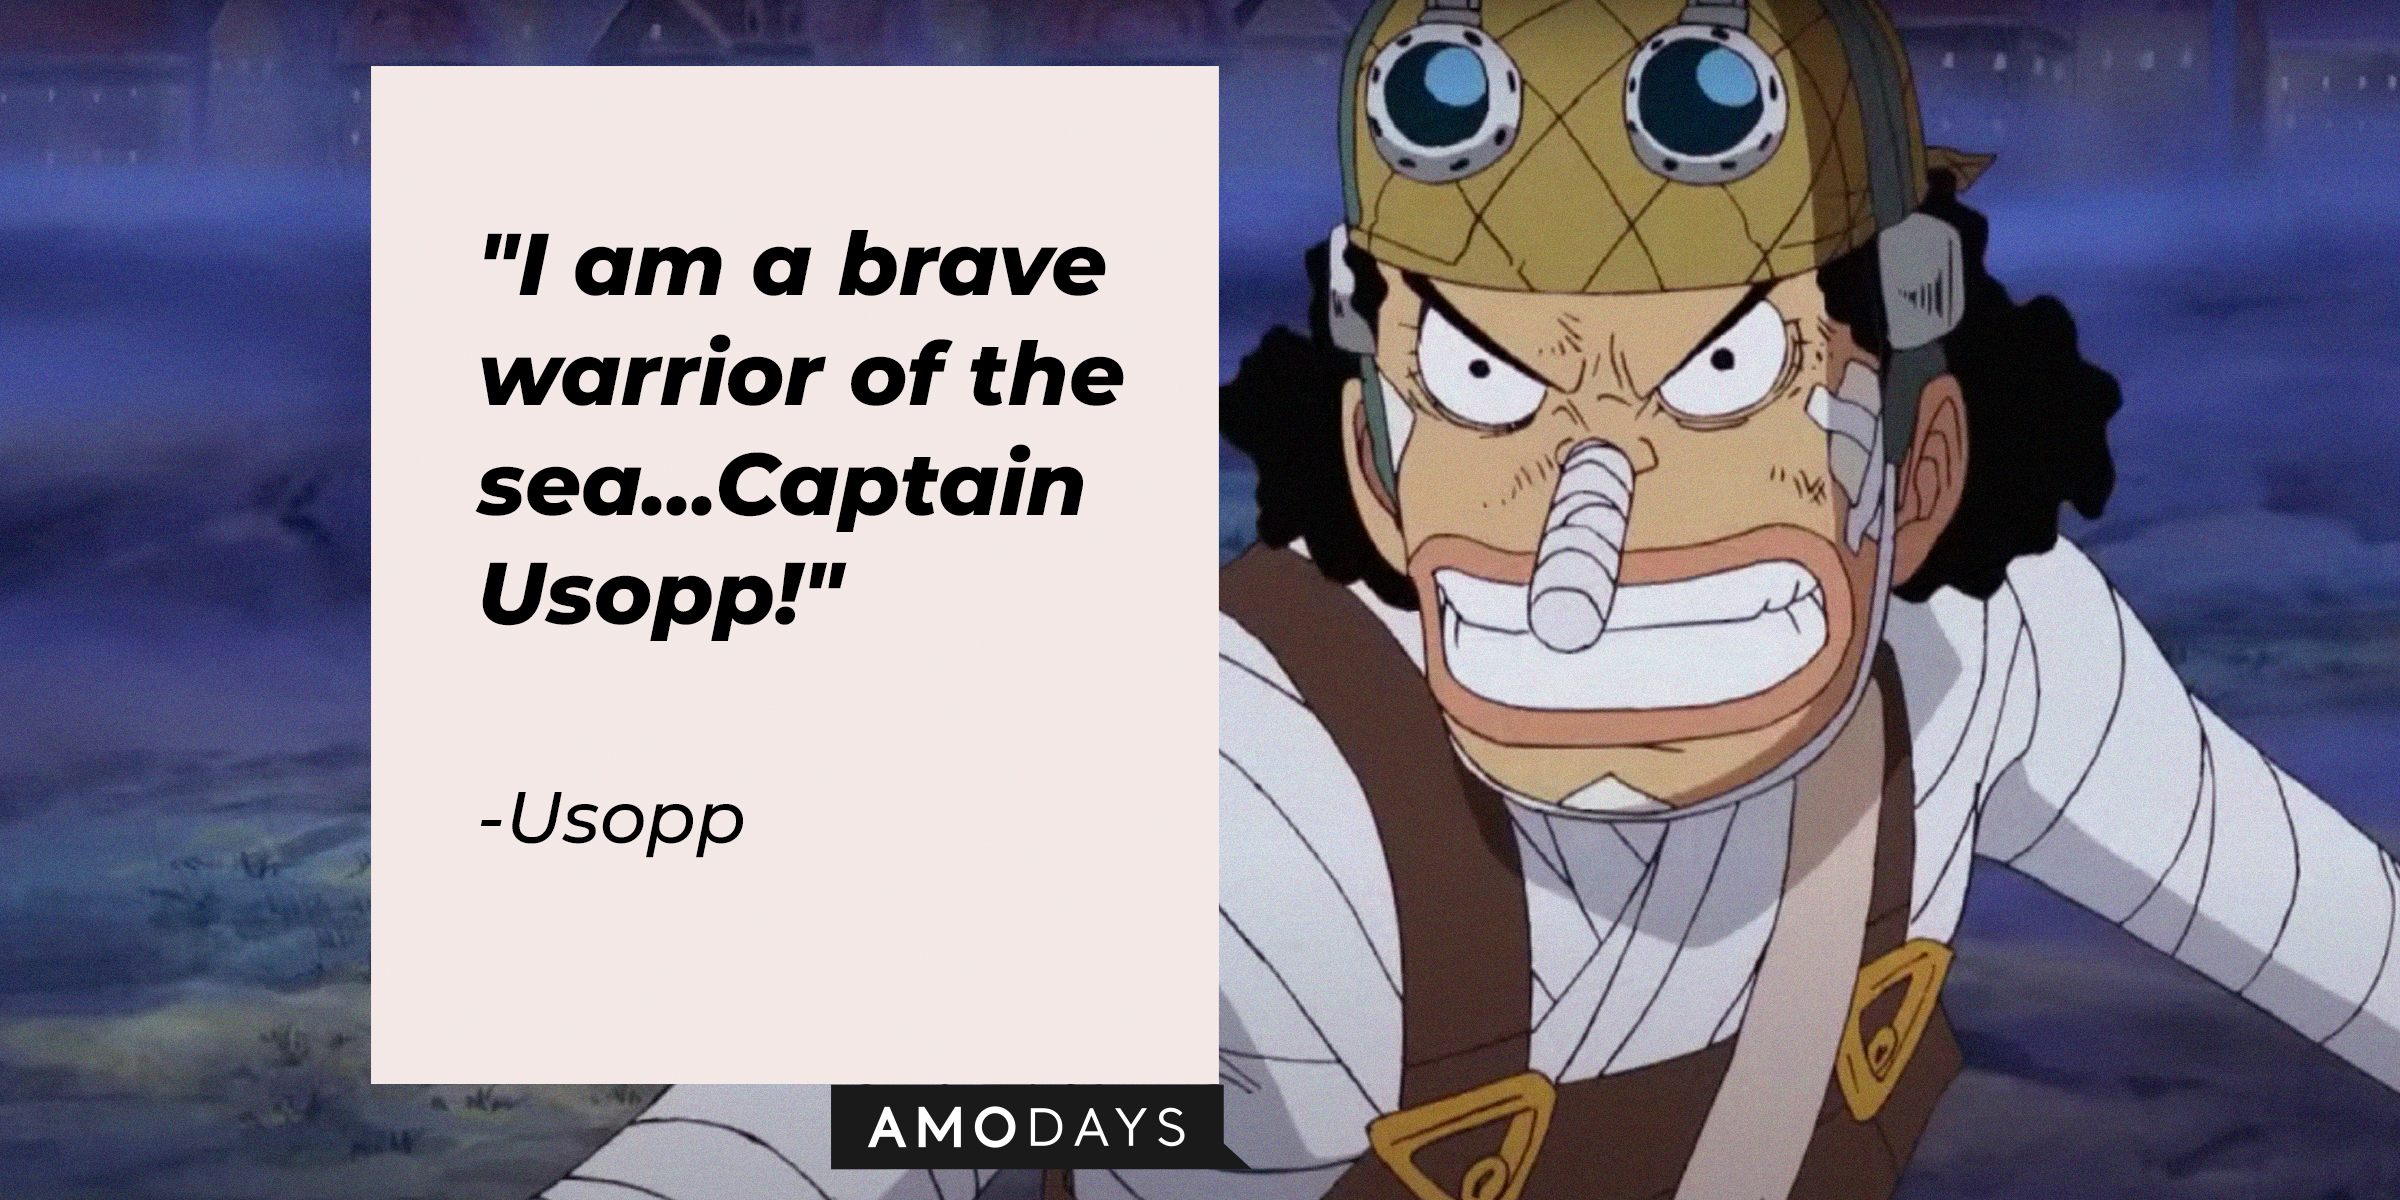 Usopp, with his quote: "I am a brave warrior of the sea...Captain Usopp!" | Source: facebook.com/onepieceofficial